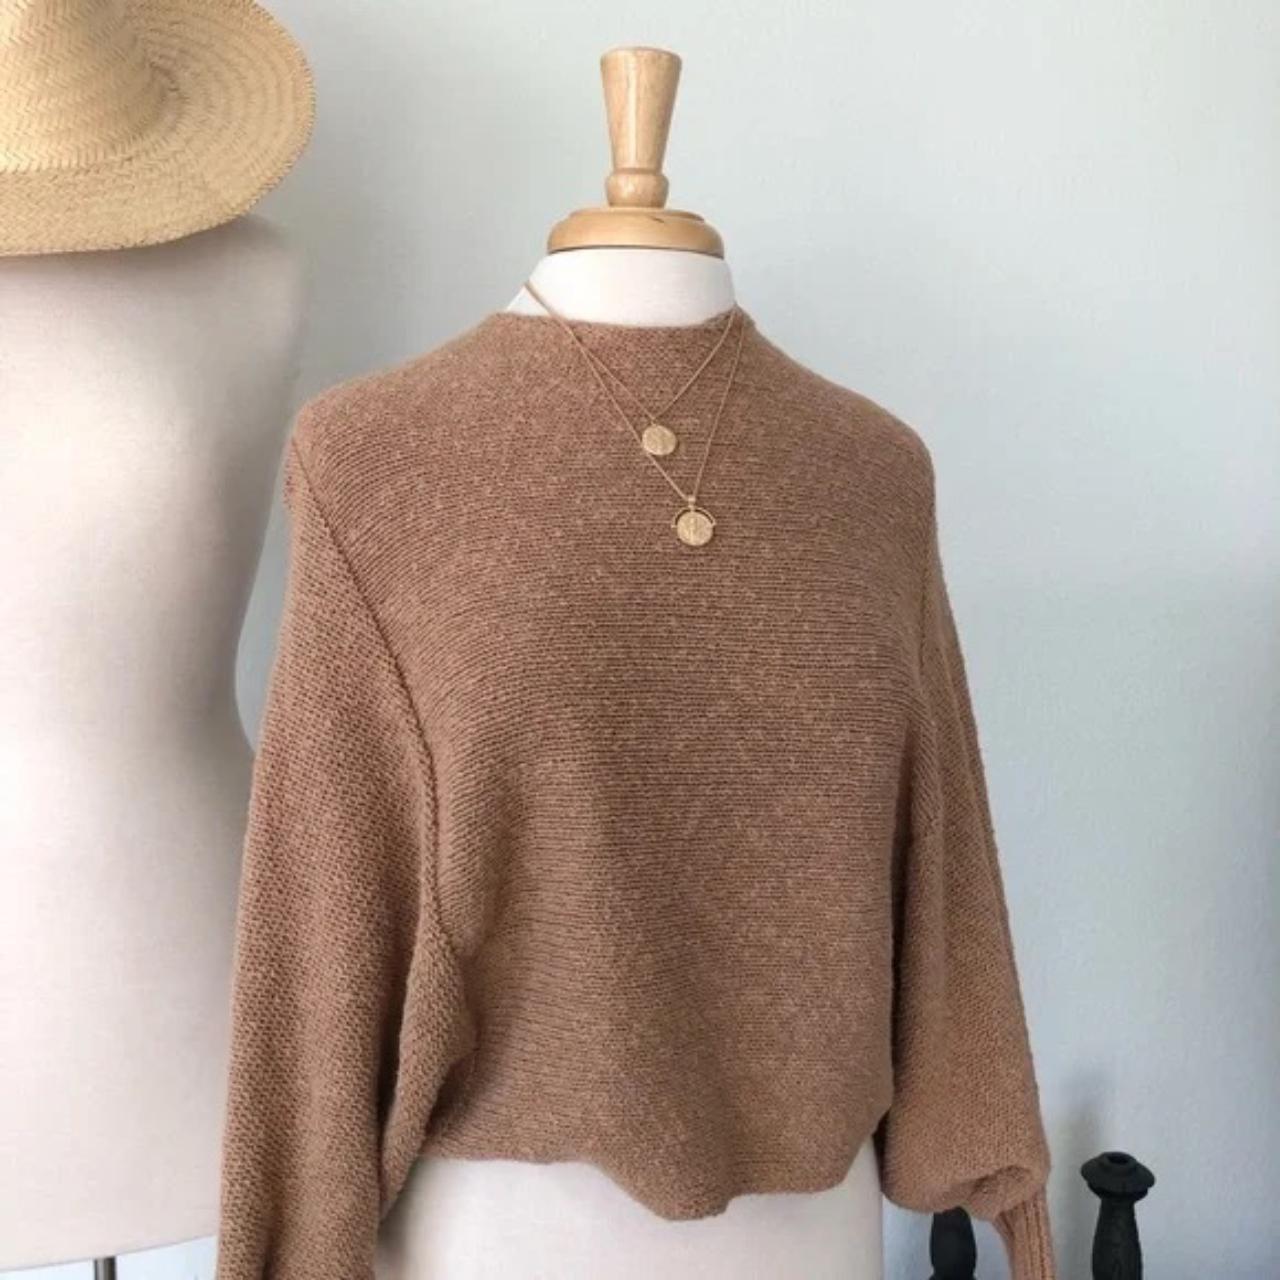 Women's Tan and Brown Blouse (4)